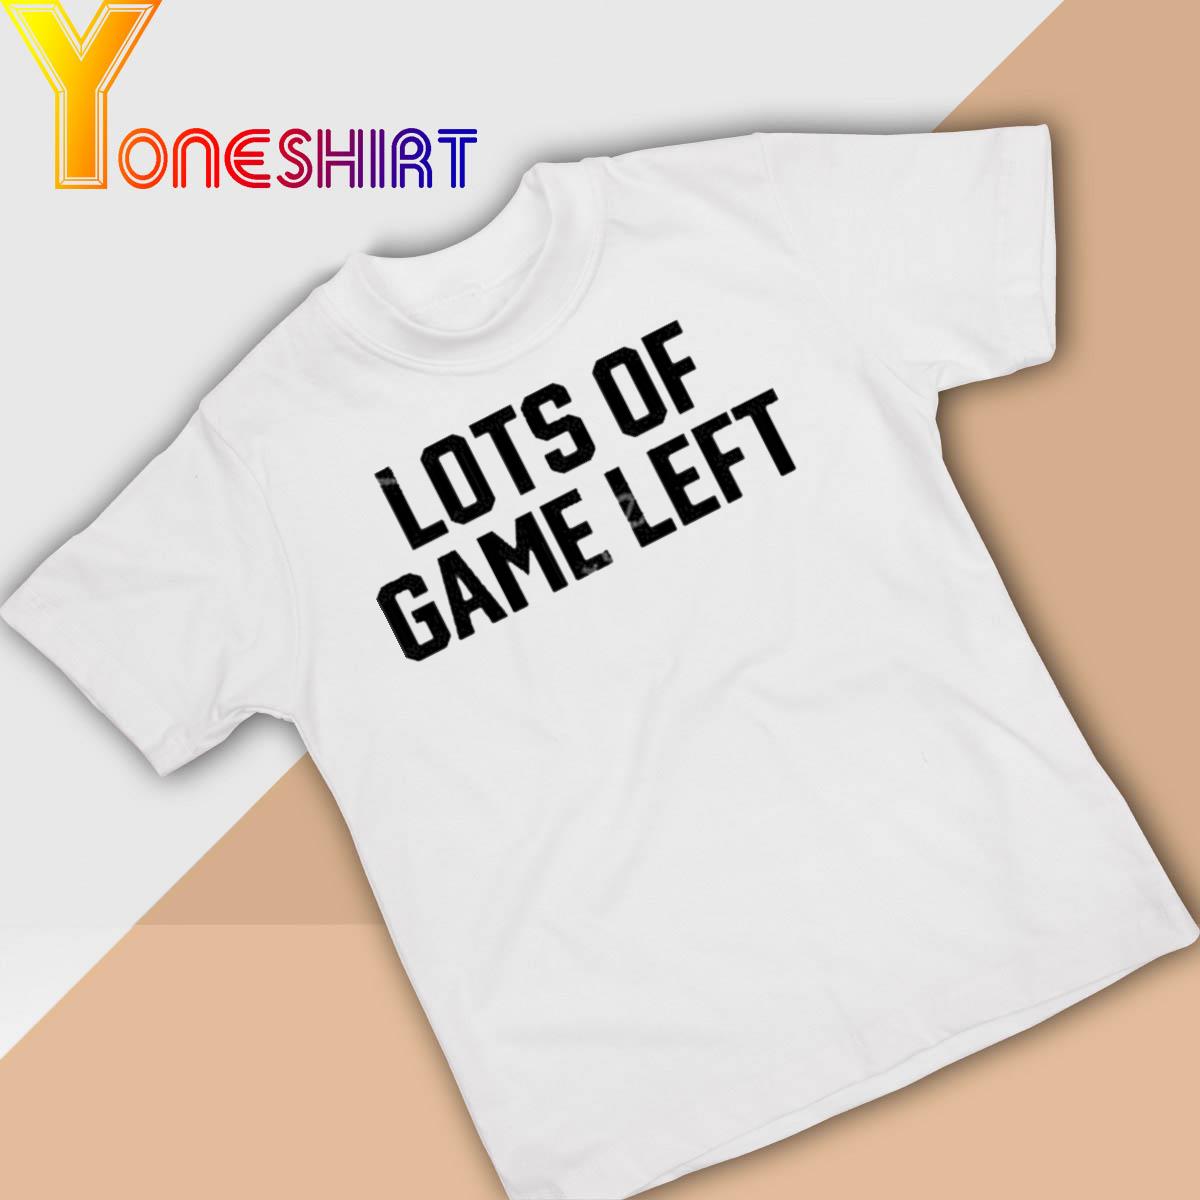 Lots Of Game Left shirt